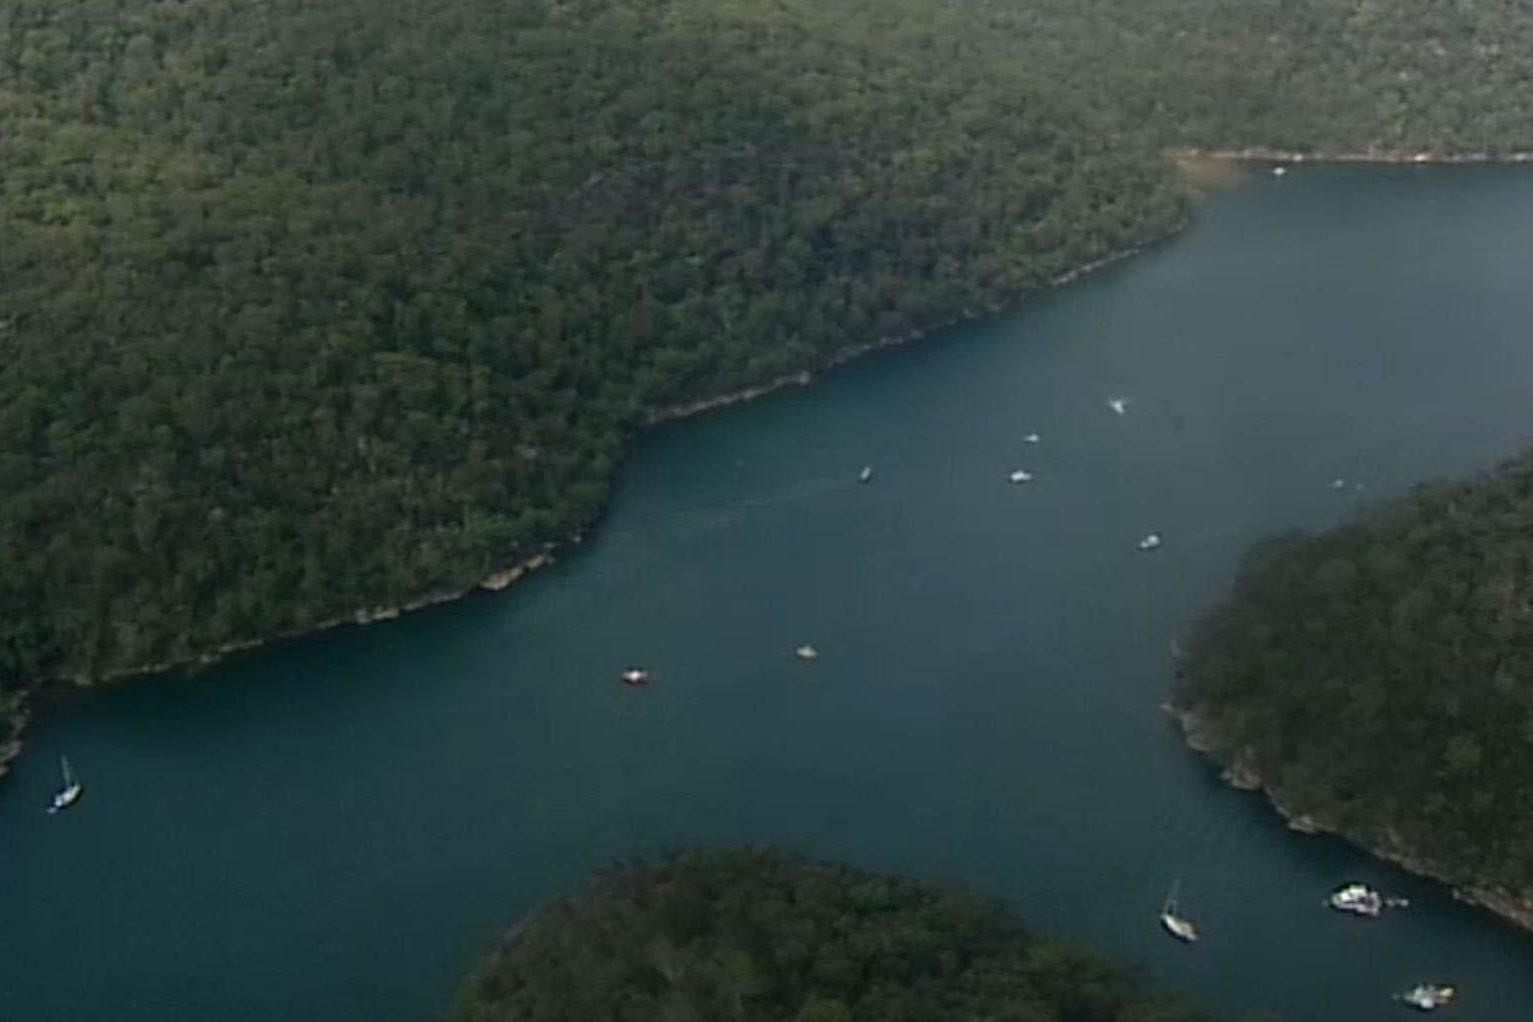 The plane crashed in Jerusalem Bay, near part of the Hawkesbury River